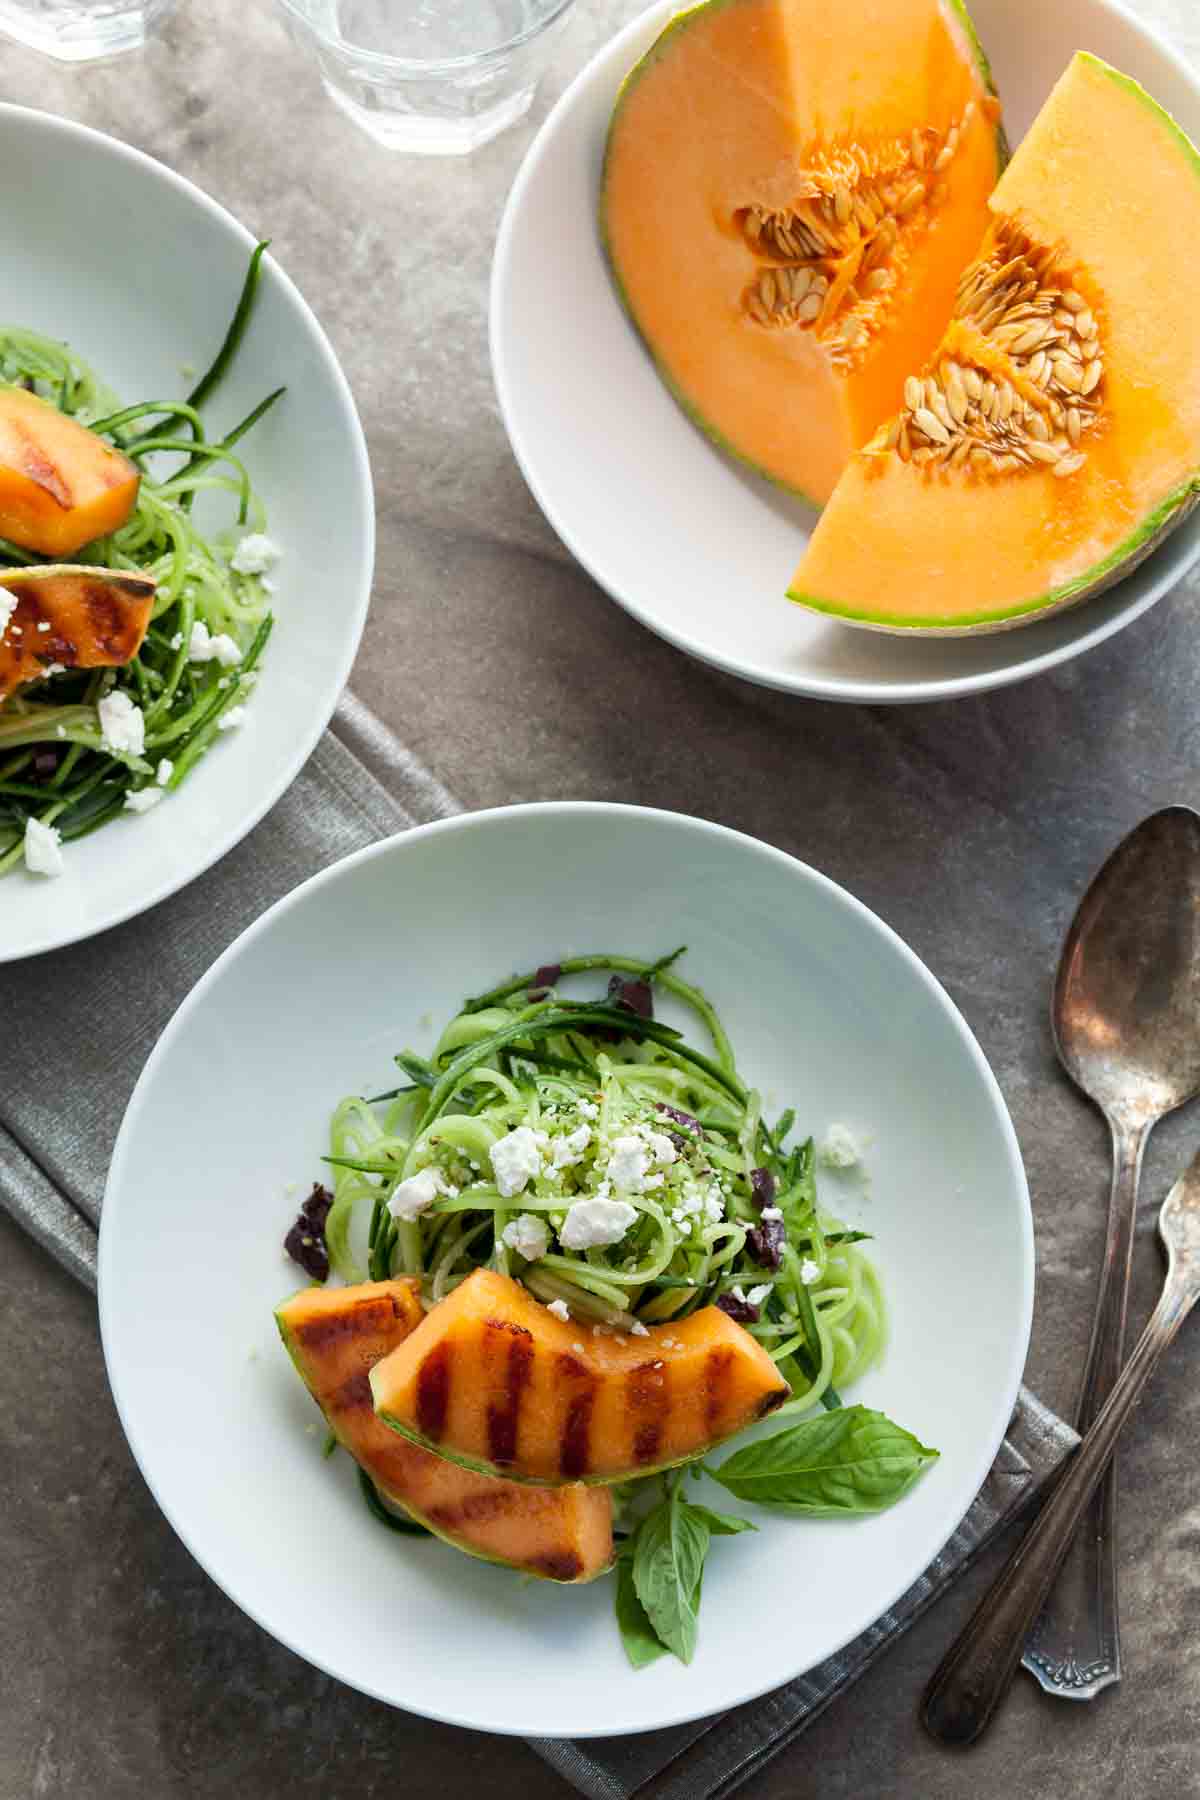 Cantaloupe Cucumber Salad in Bowls on Table